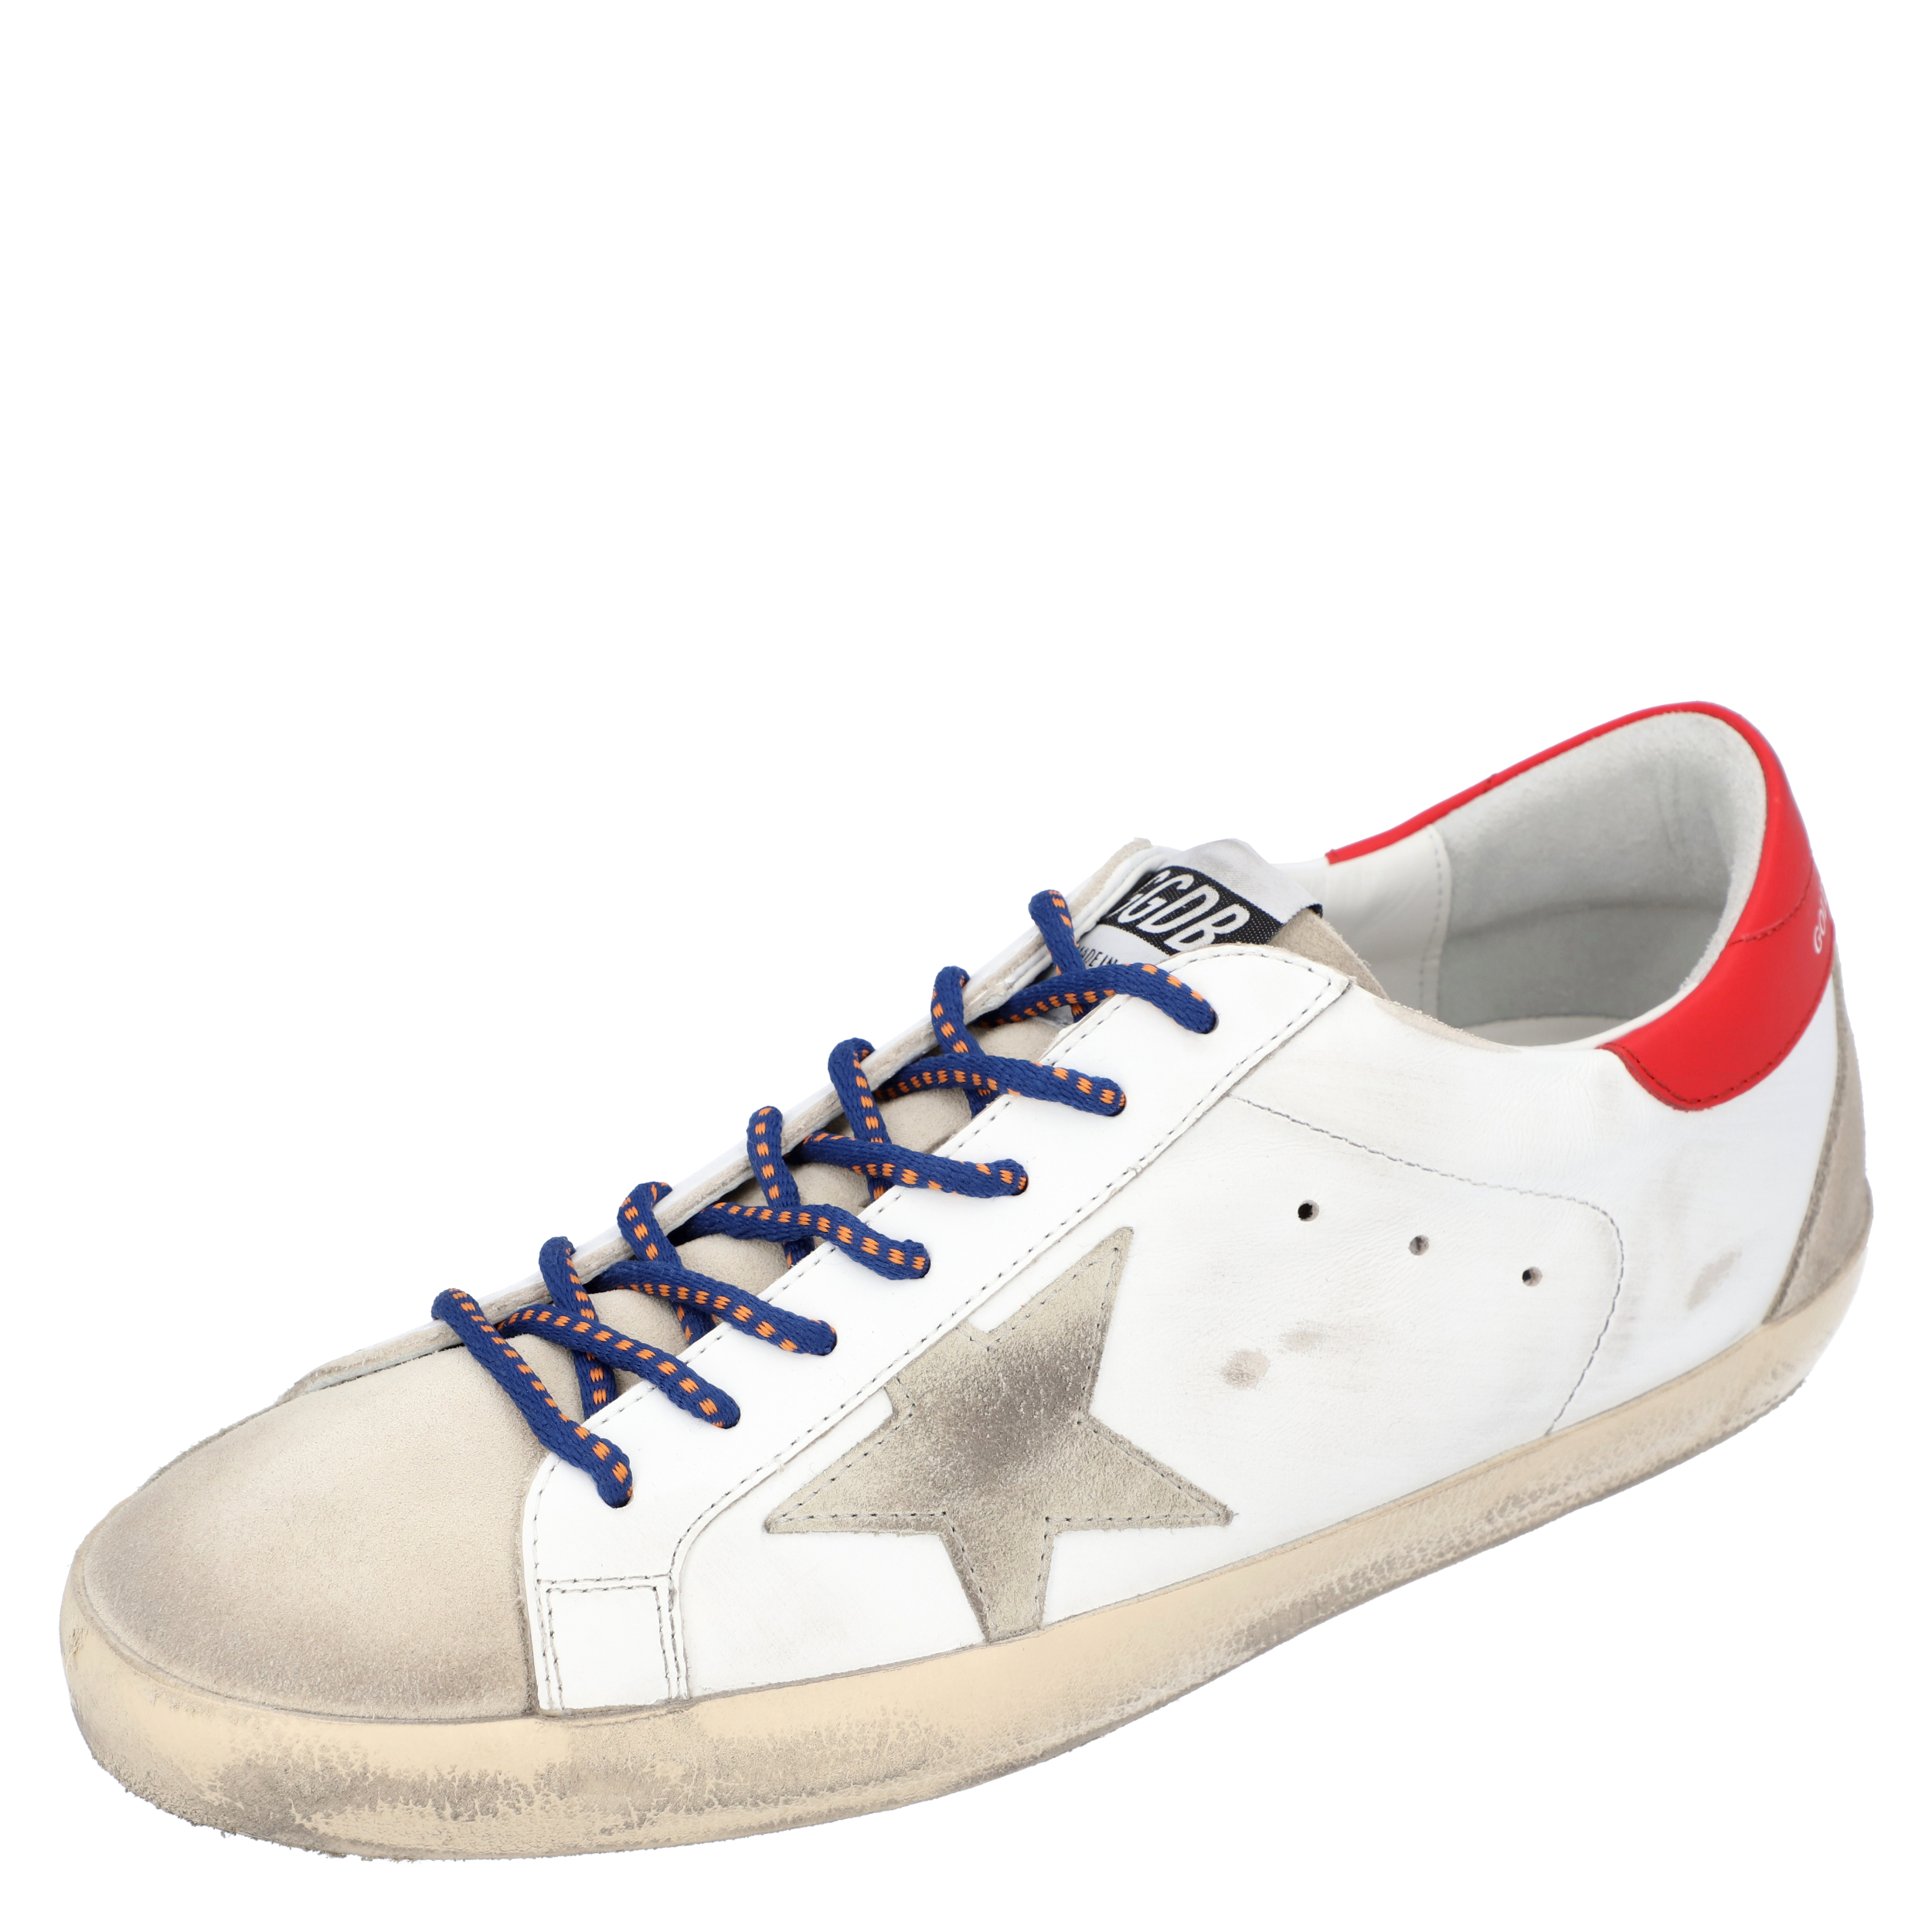 Golden Goose White/Red Leather Superstar Sneaker Size EU 41